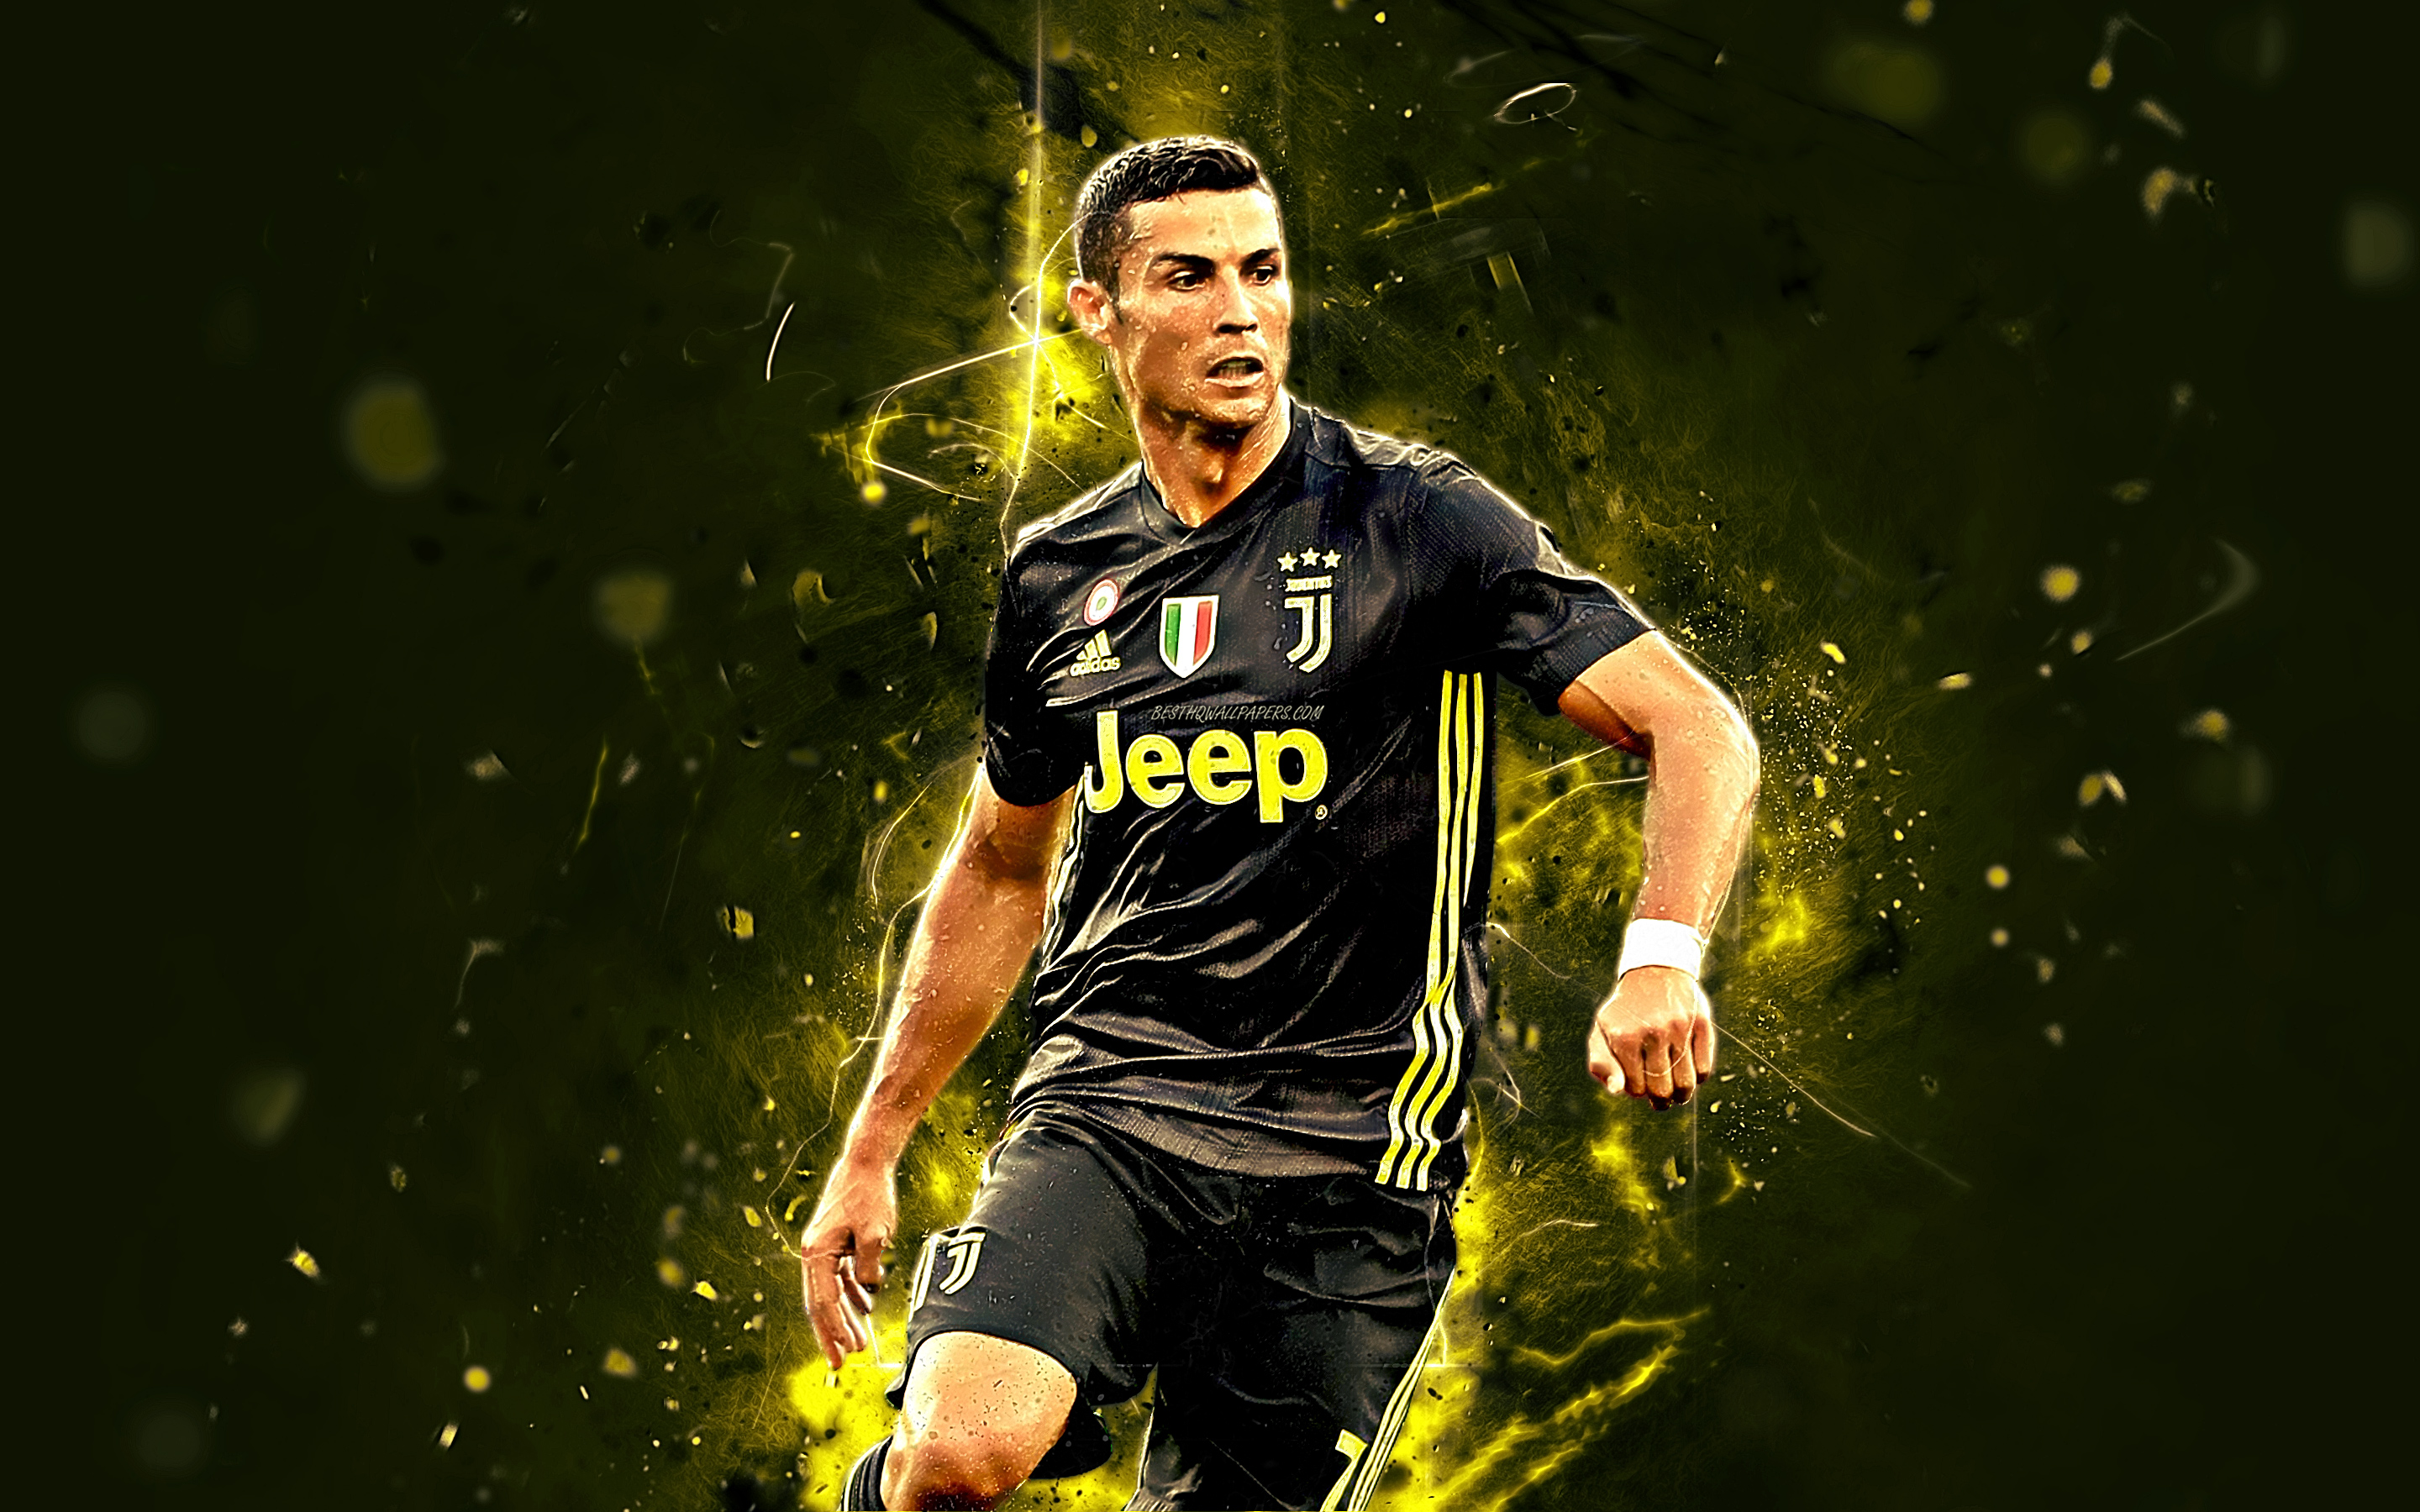 Download wallpaper CR Ronaldo, black uniform, Juventus FC, Bianconeri, portuguese footballers, abstract art, soccer, Serie A, Cristiano Ronaldo, neon lights, CR7 Juve for desktop with resolution 2880x1800. High Quality HD picture wallpaper